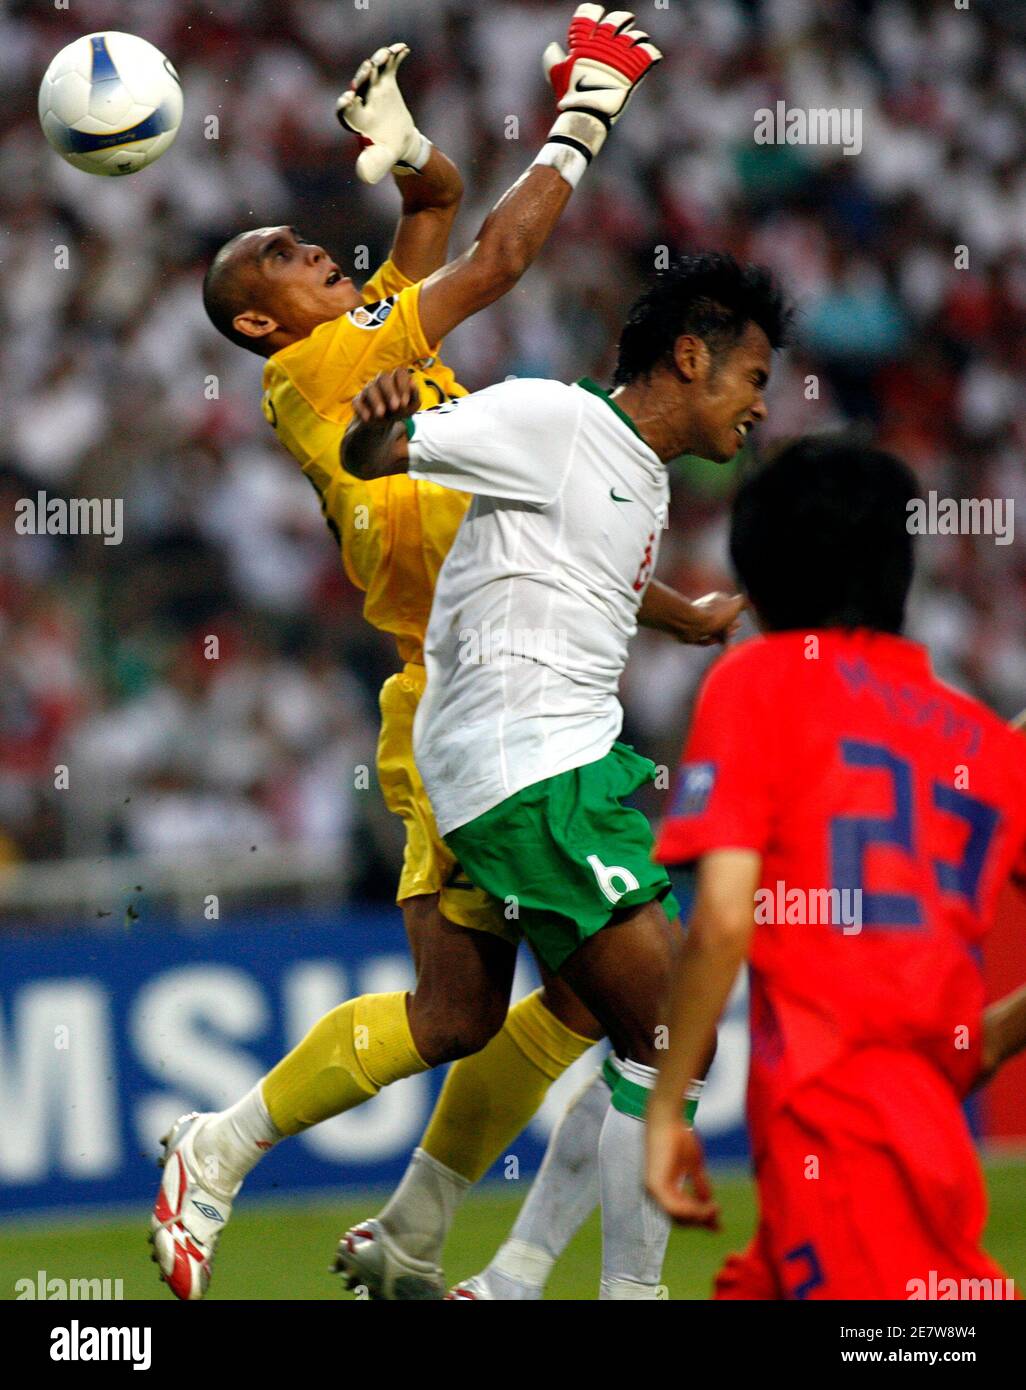 Indonesia's goalkeeper Markus Horison Ririhina (L) and team mate Charis Yulianto (C) go for the ball during their 2007 AFC Asian Cup Group D soccer match against South Korea in Jakarta July 18, 2007. REUTERS/Supri  (INDONESIA) Stock Photo